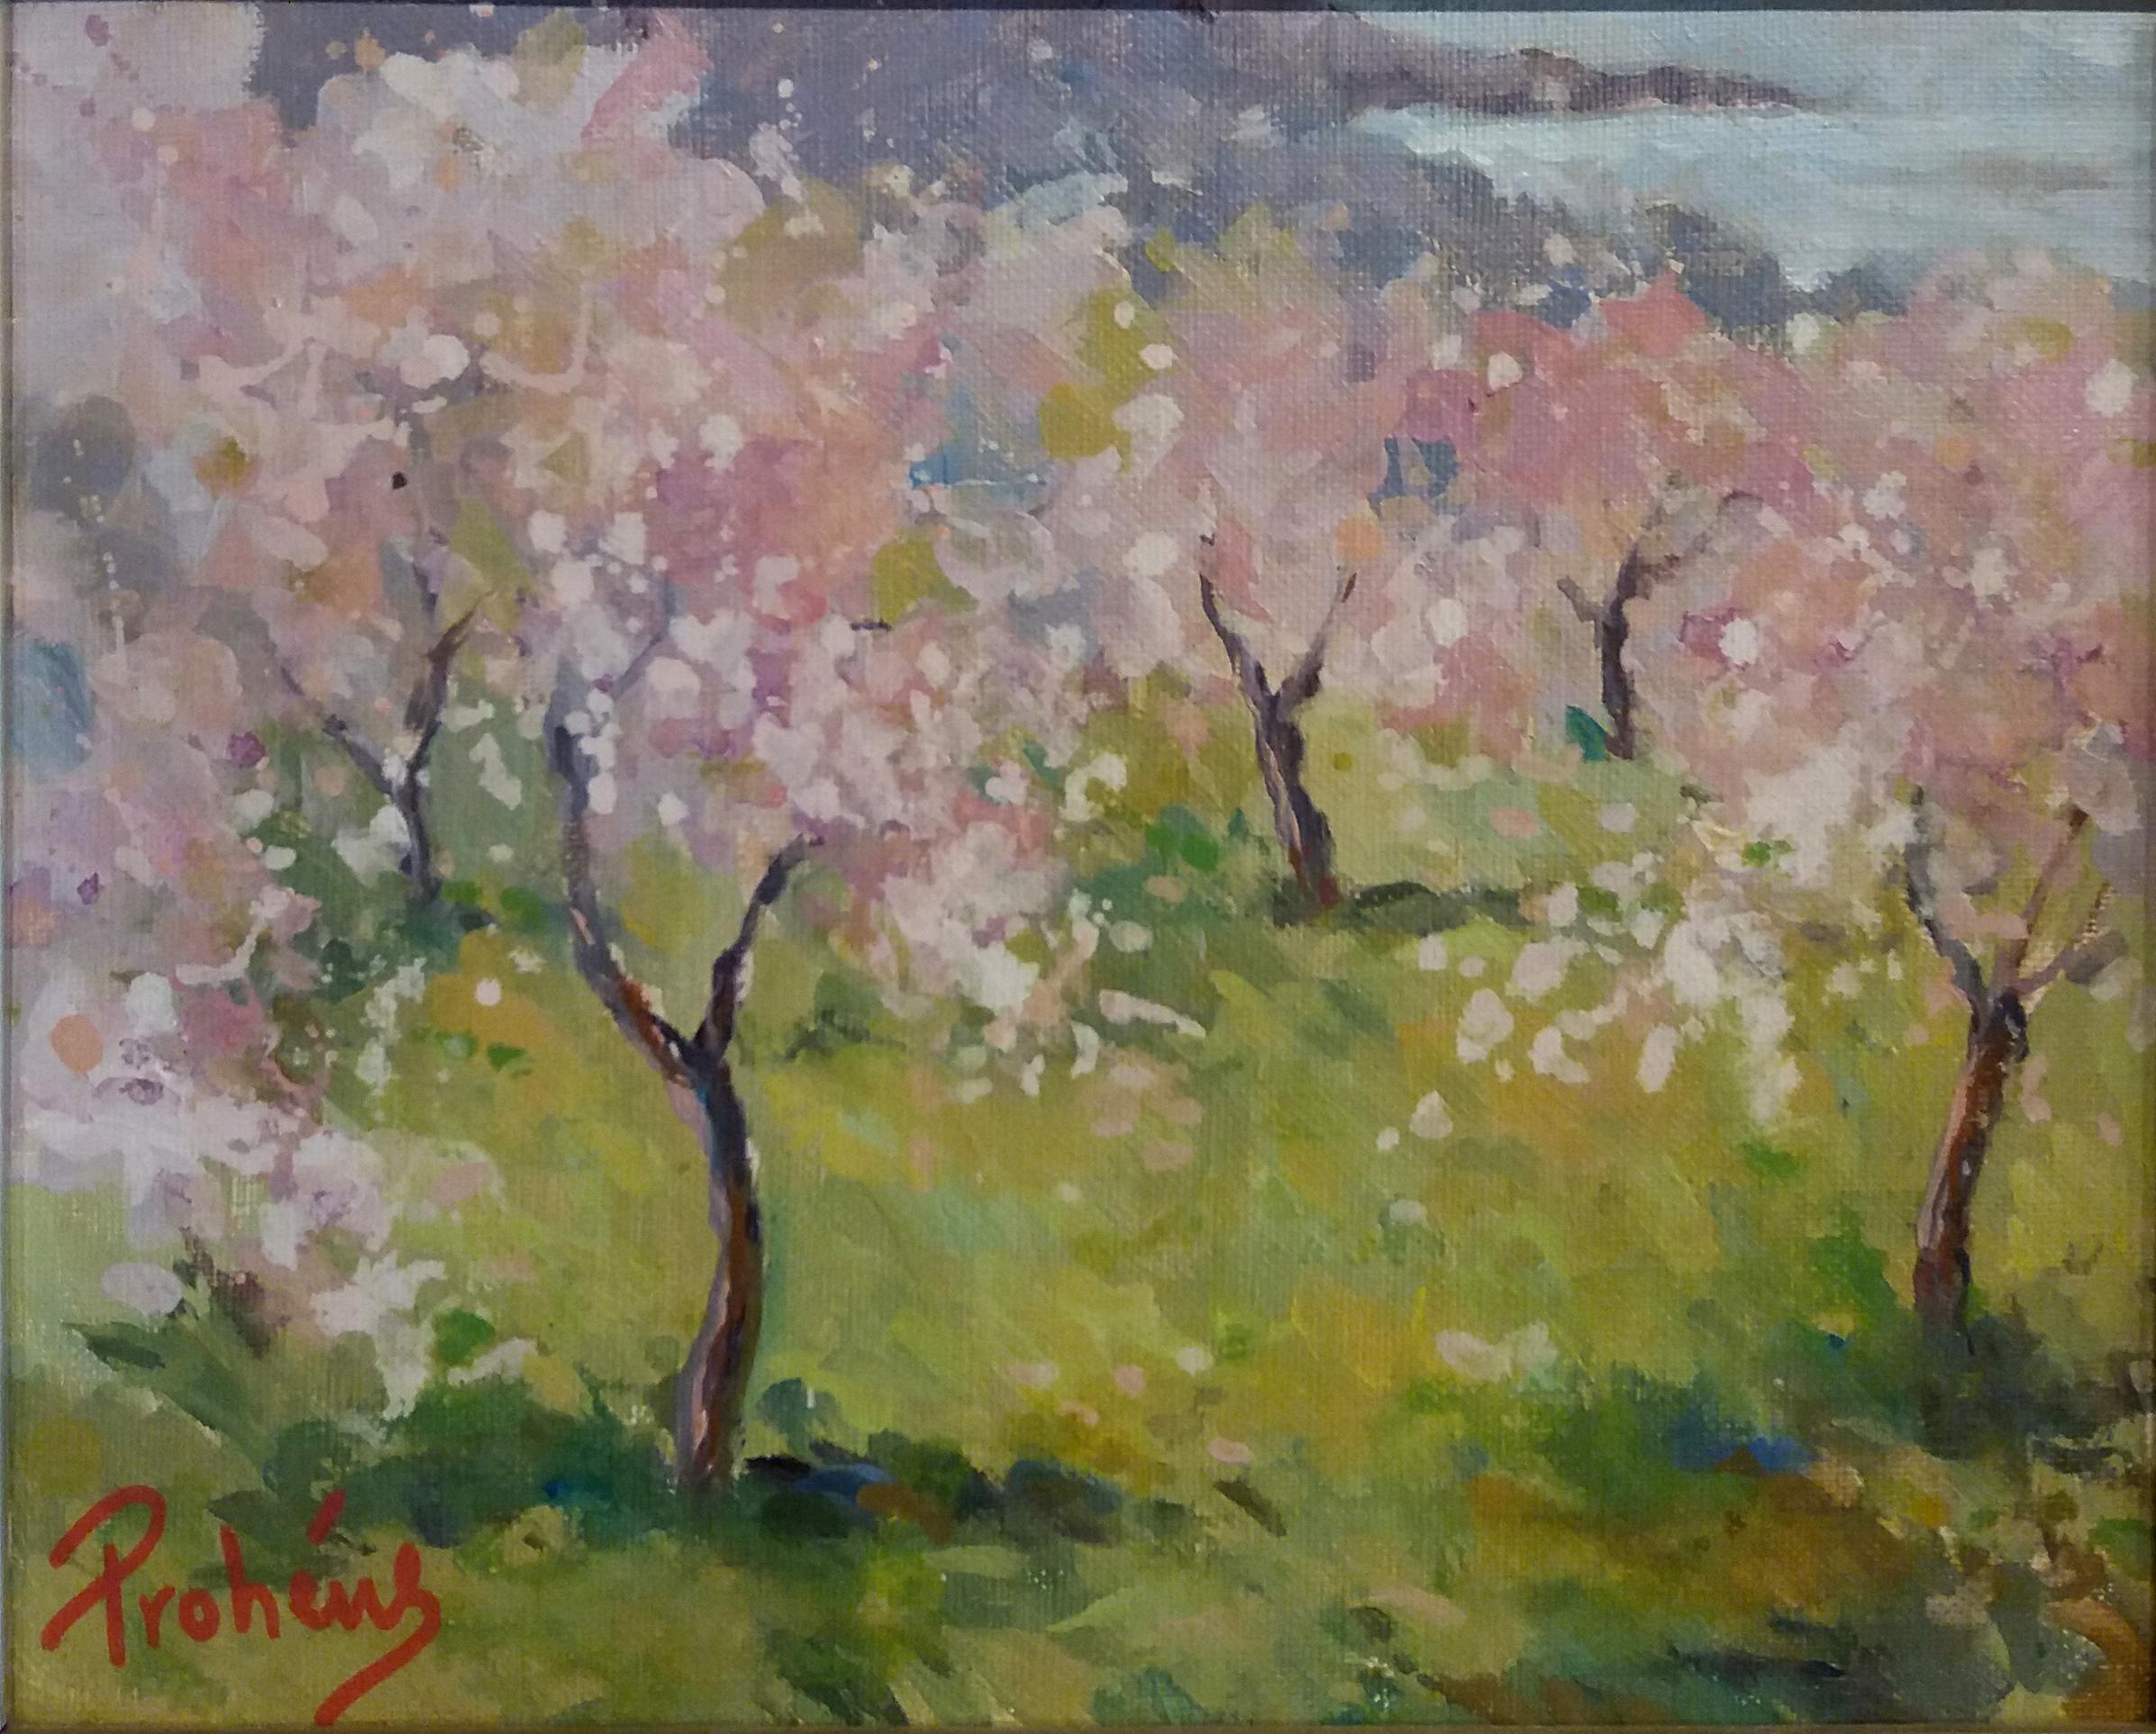 Prohens  Almond Blossom Mallorca. original acrylic painting - Painting by Onofre Prohens